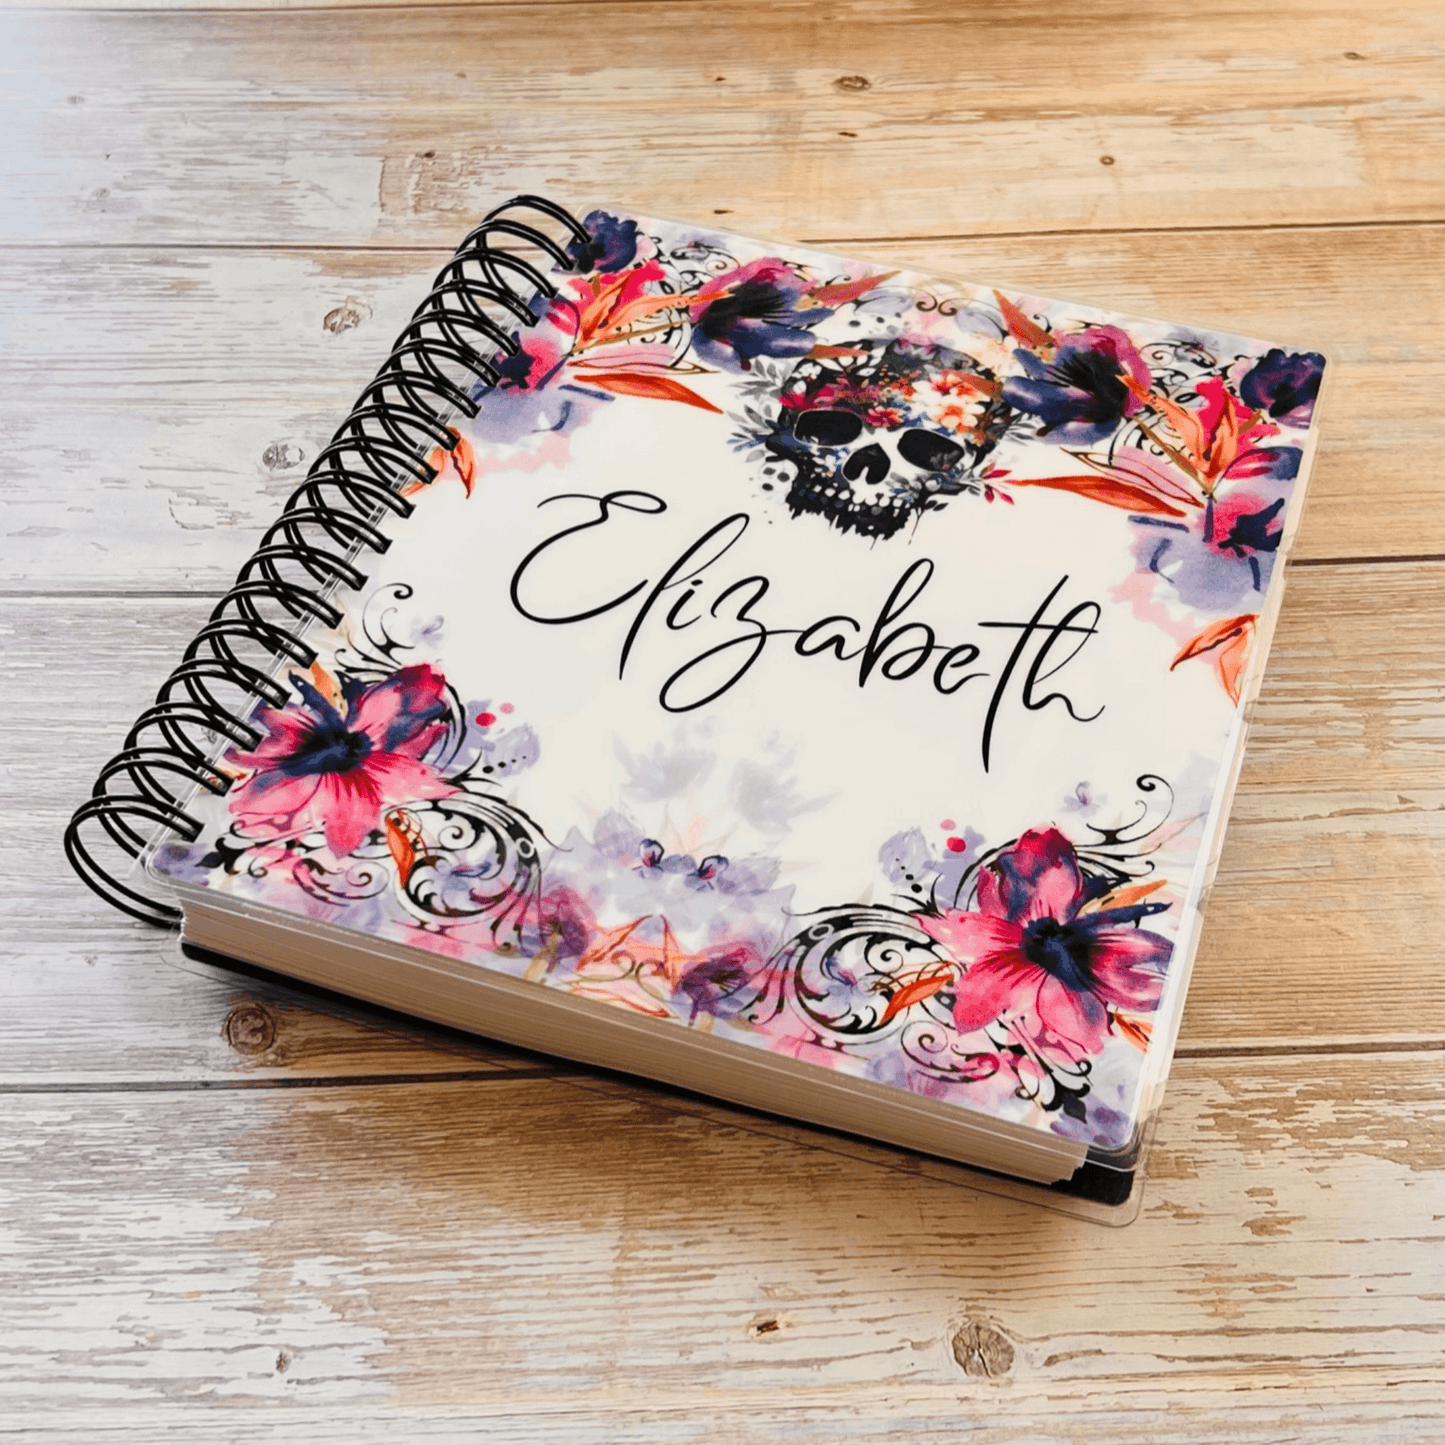 Personalized Weekly Planner 2023-2024 | Gothic Garden Weekly Planners Artful Planner Co. 